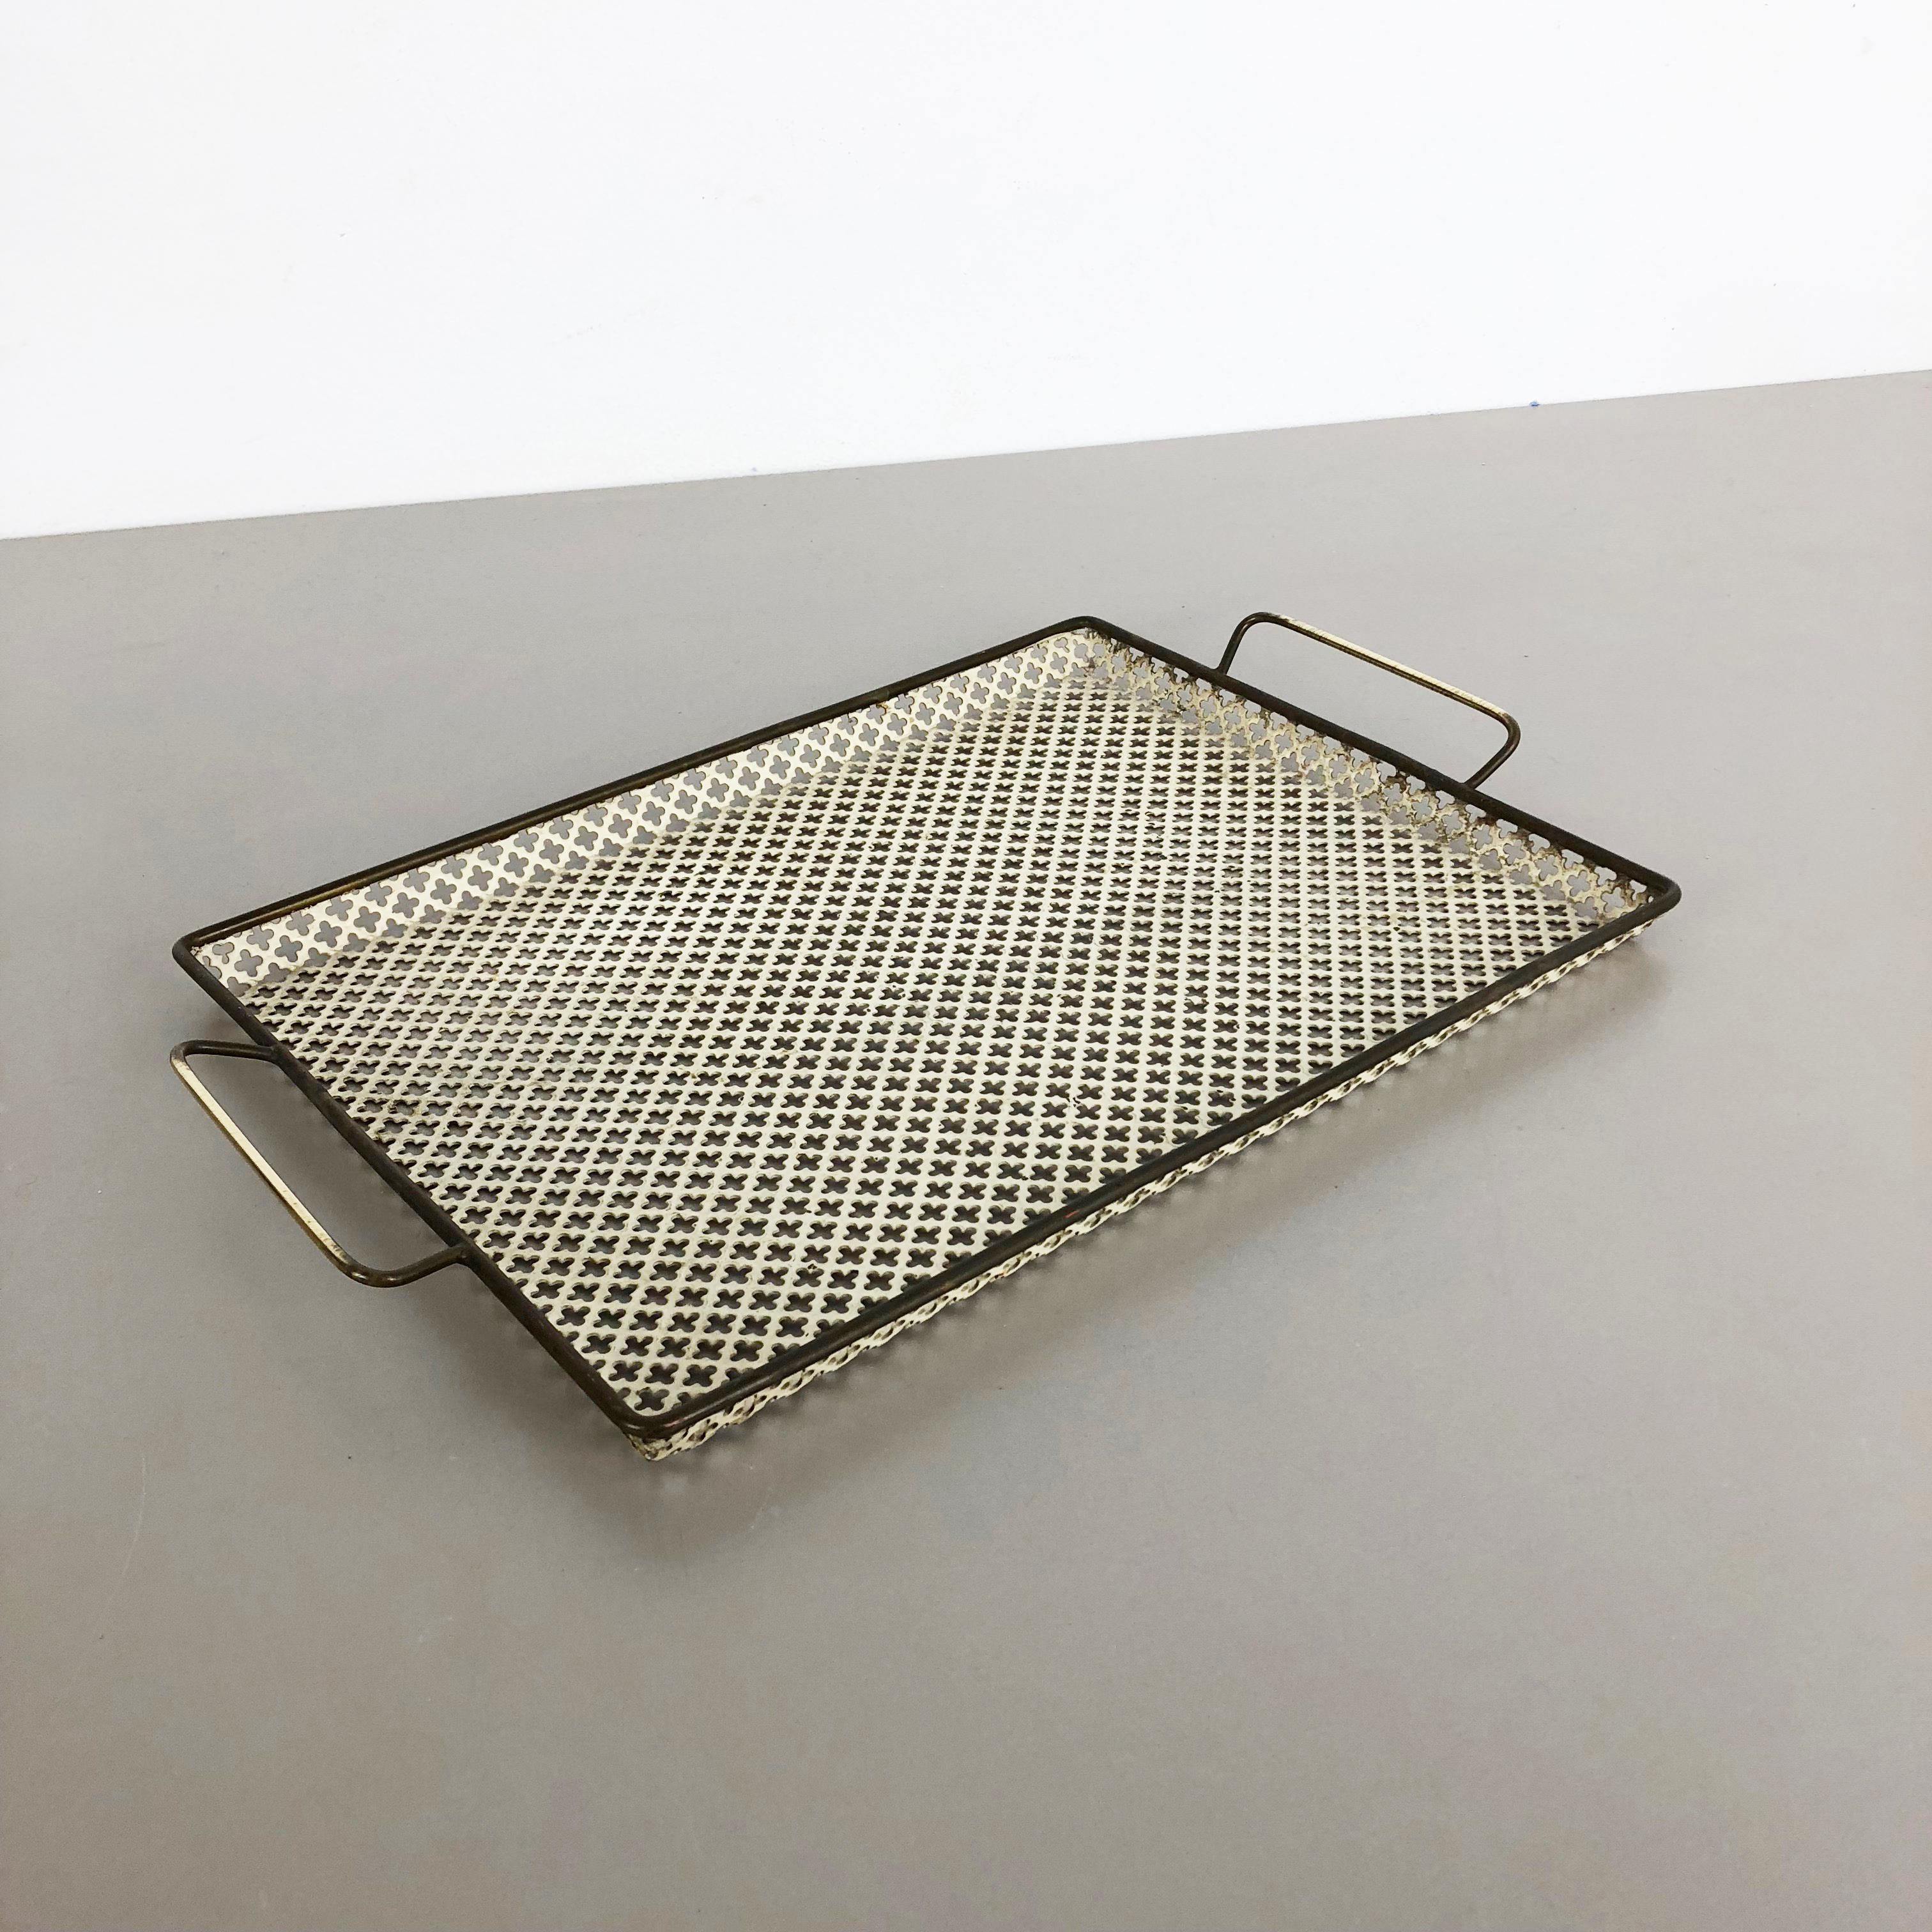 Metal tray.

In style of Mathieu Matégot.

Origin: France,

1950s.

This original vintage tray element was produced in the 1960s in France. It was made of metal in whole pattern optic which is reminiscent with the designs by Mathieu Matégot.